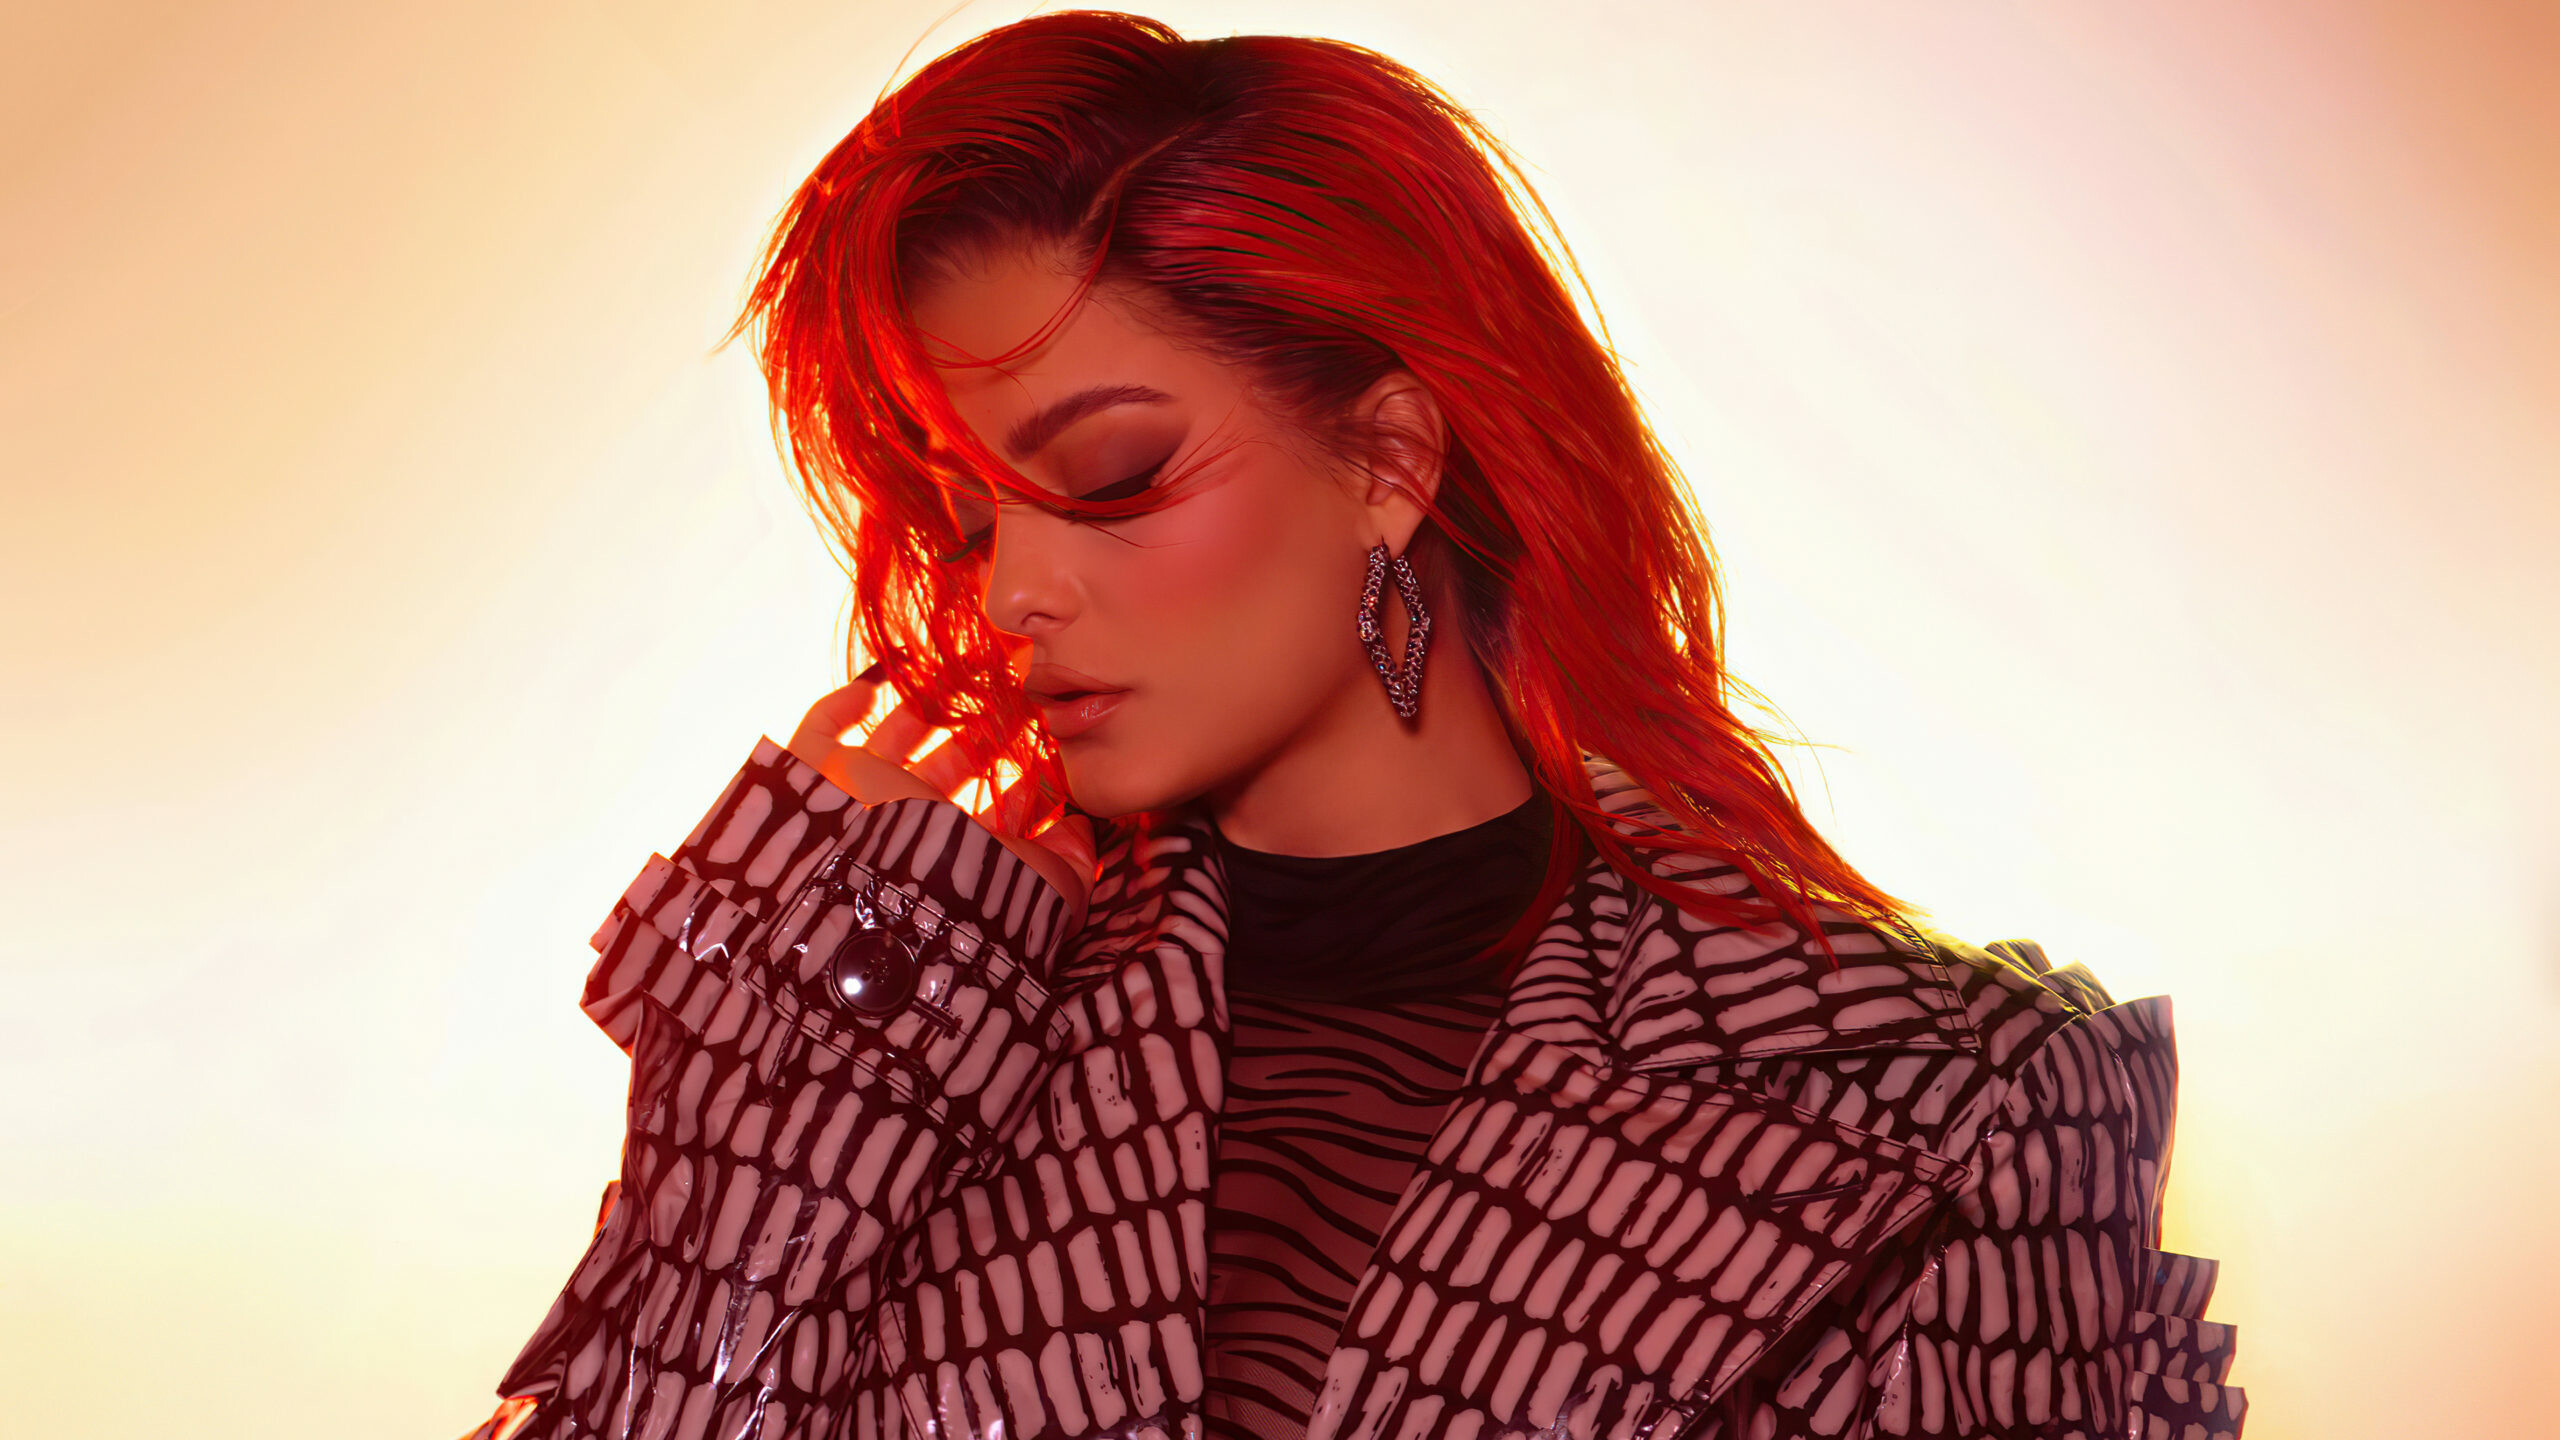 Bebe Rexha: Better Mistakes became the singer's lowest charting album on the chart. 2560x1440 HD Wallpaper.